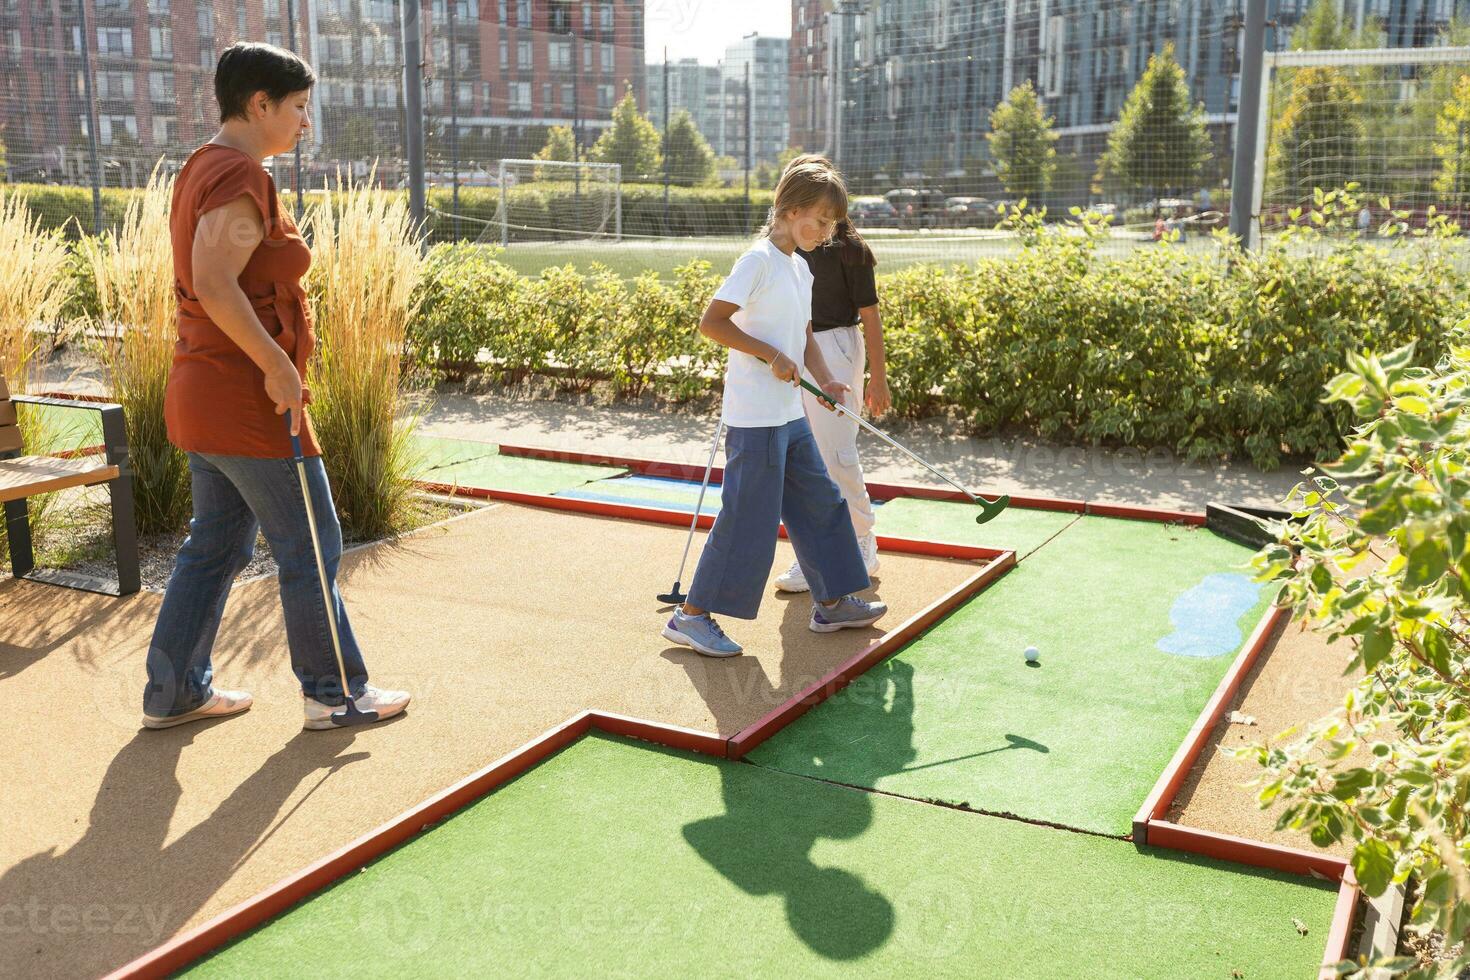 Group of smiling friends enjoying together playing mini golf in the city. photo